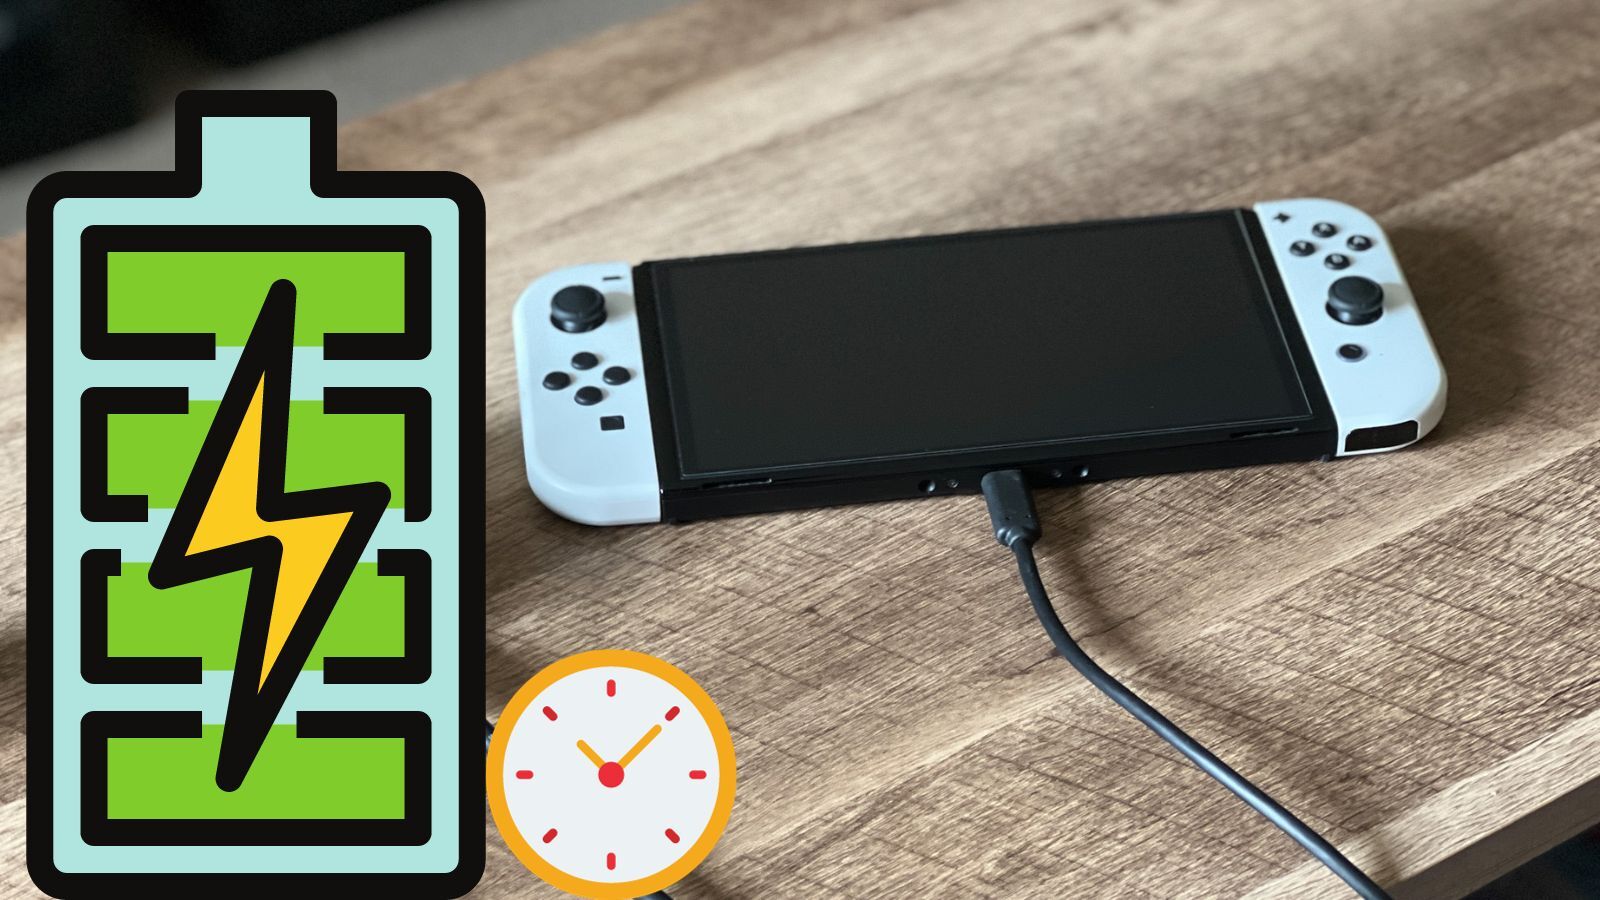 How Long Does It Take To Charge A Nintendo Switch?